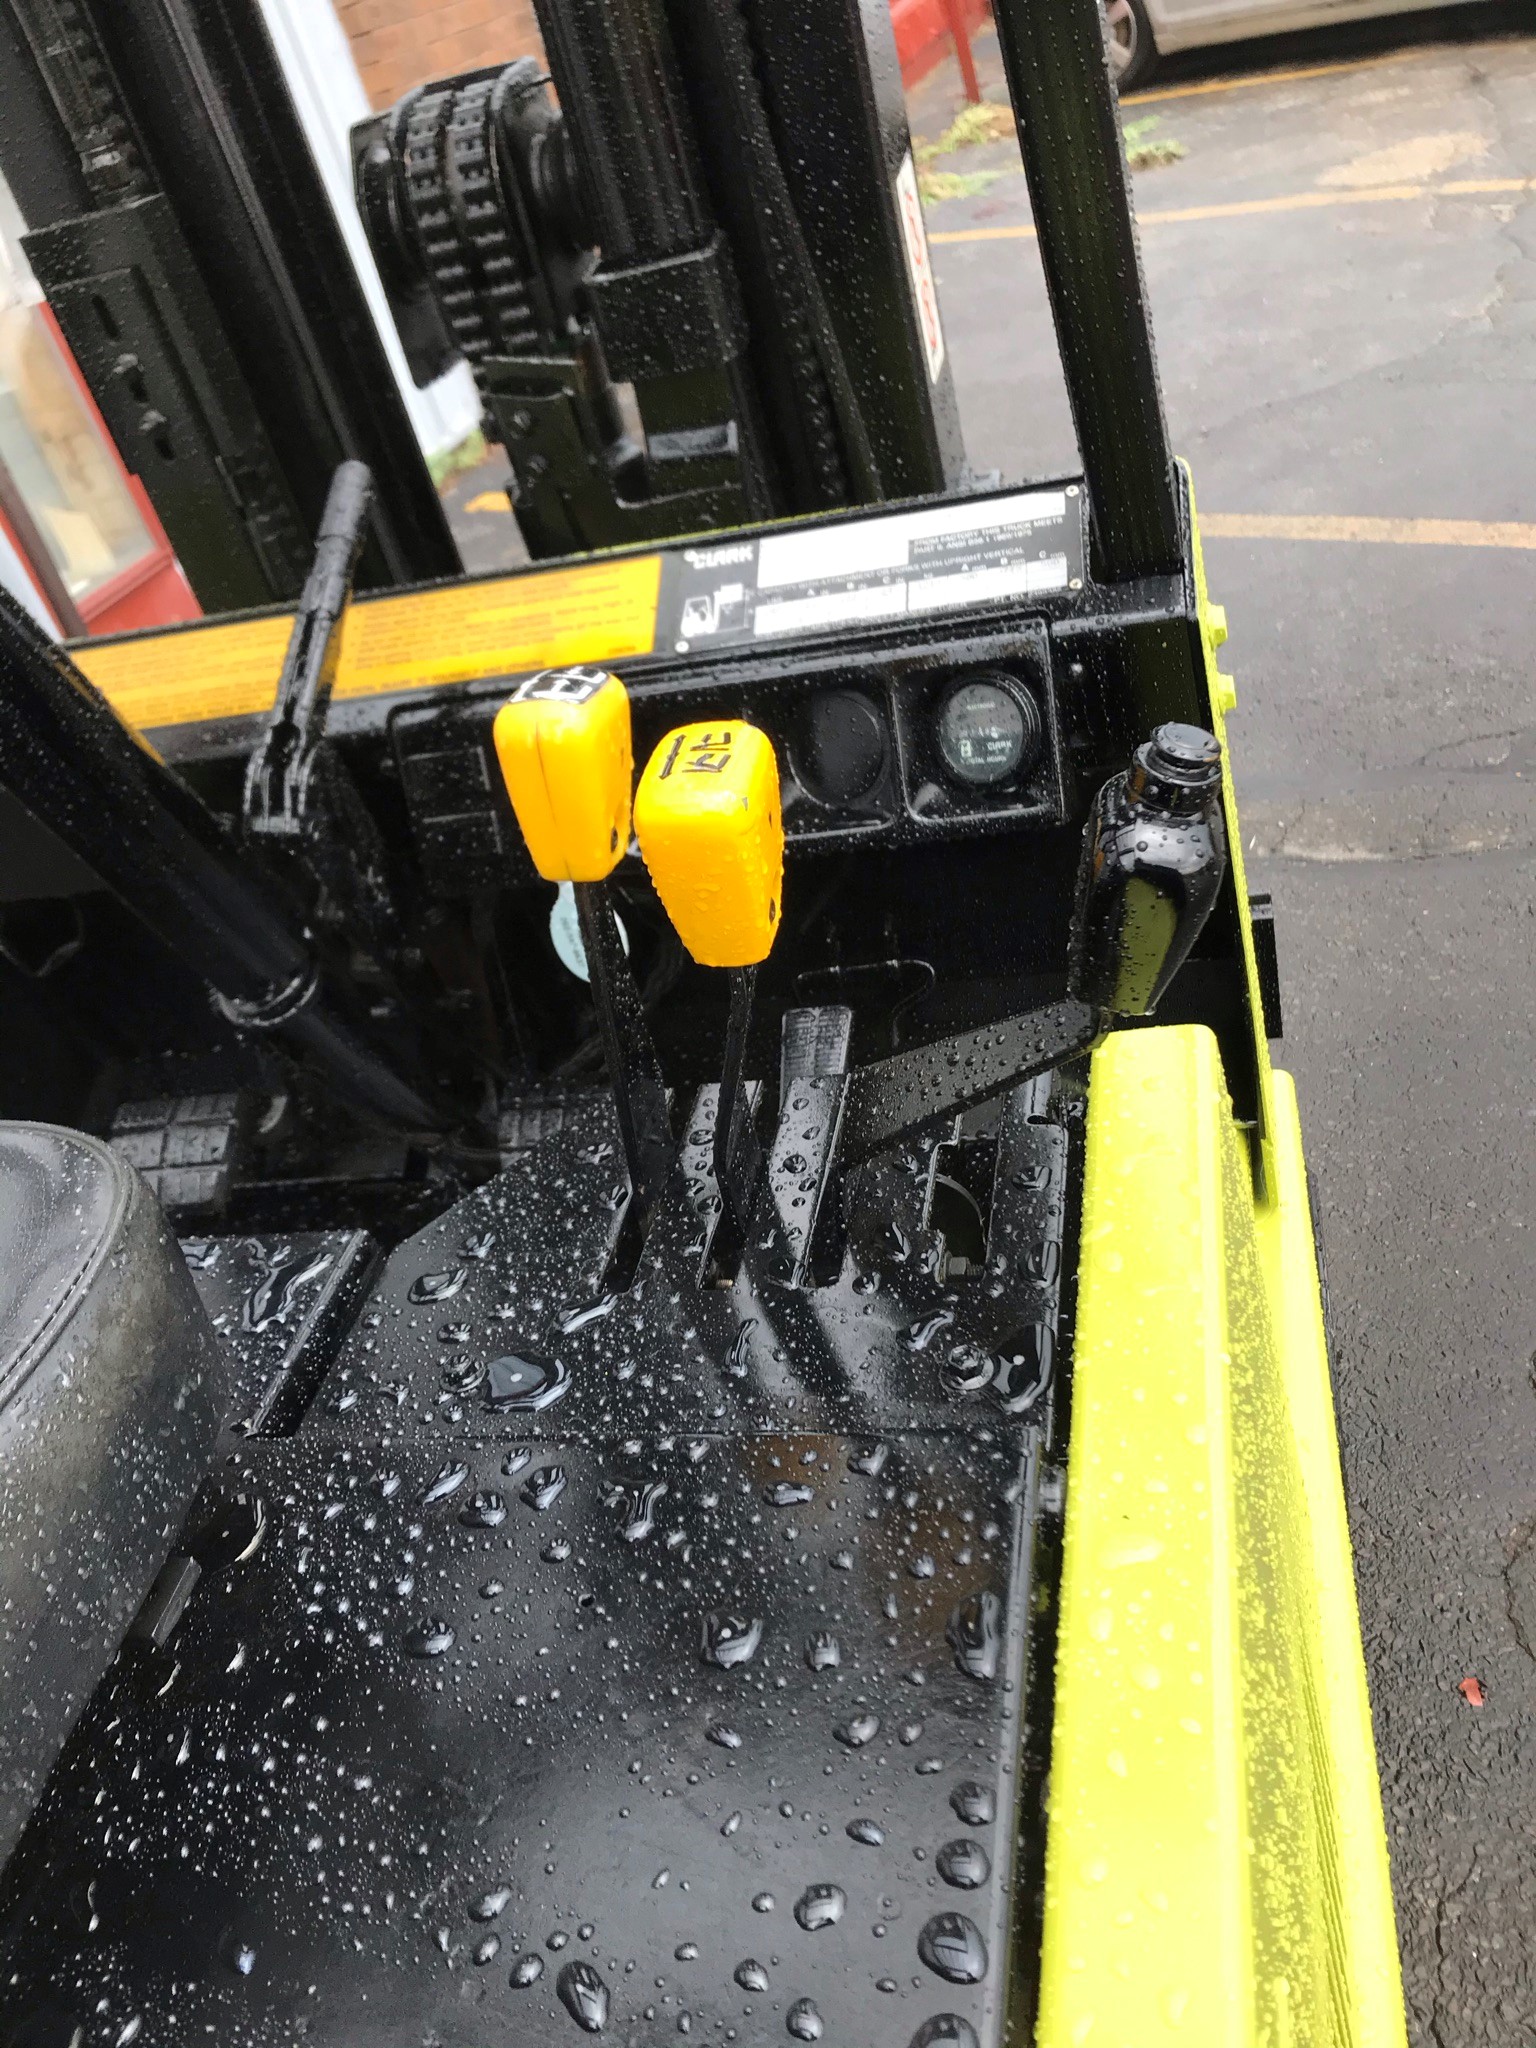 Green clark forklift with side shifter for sale